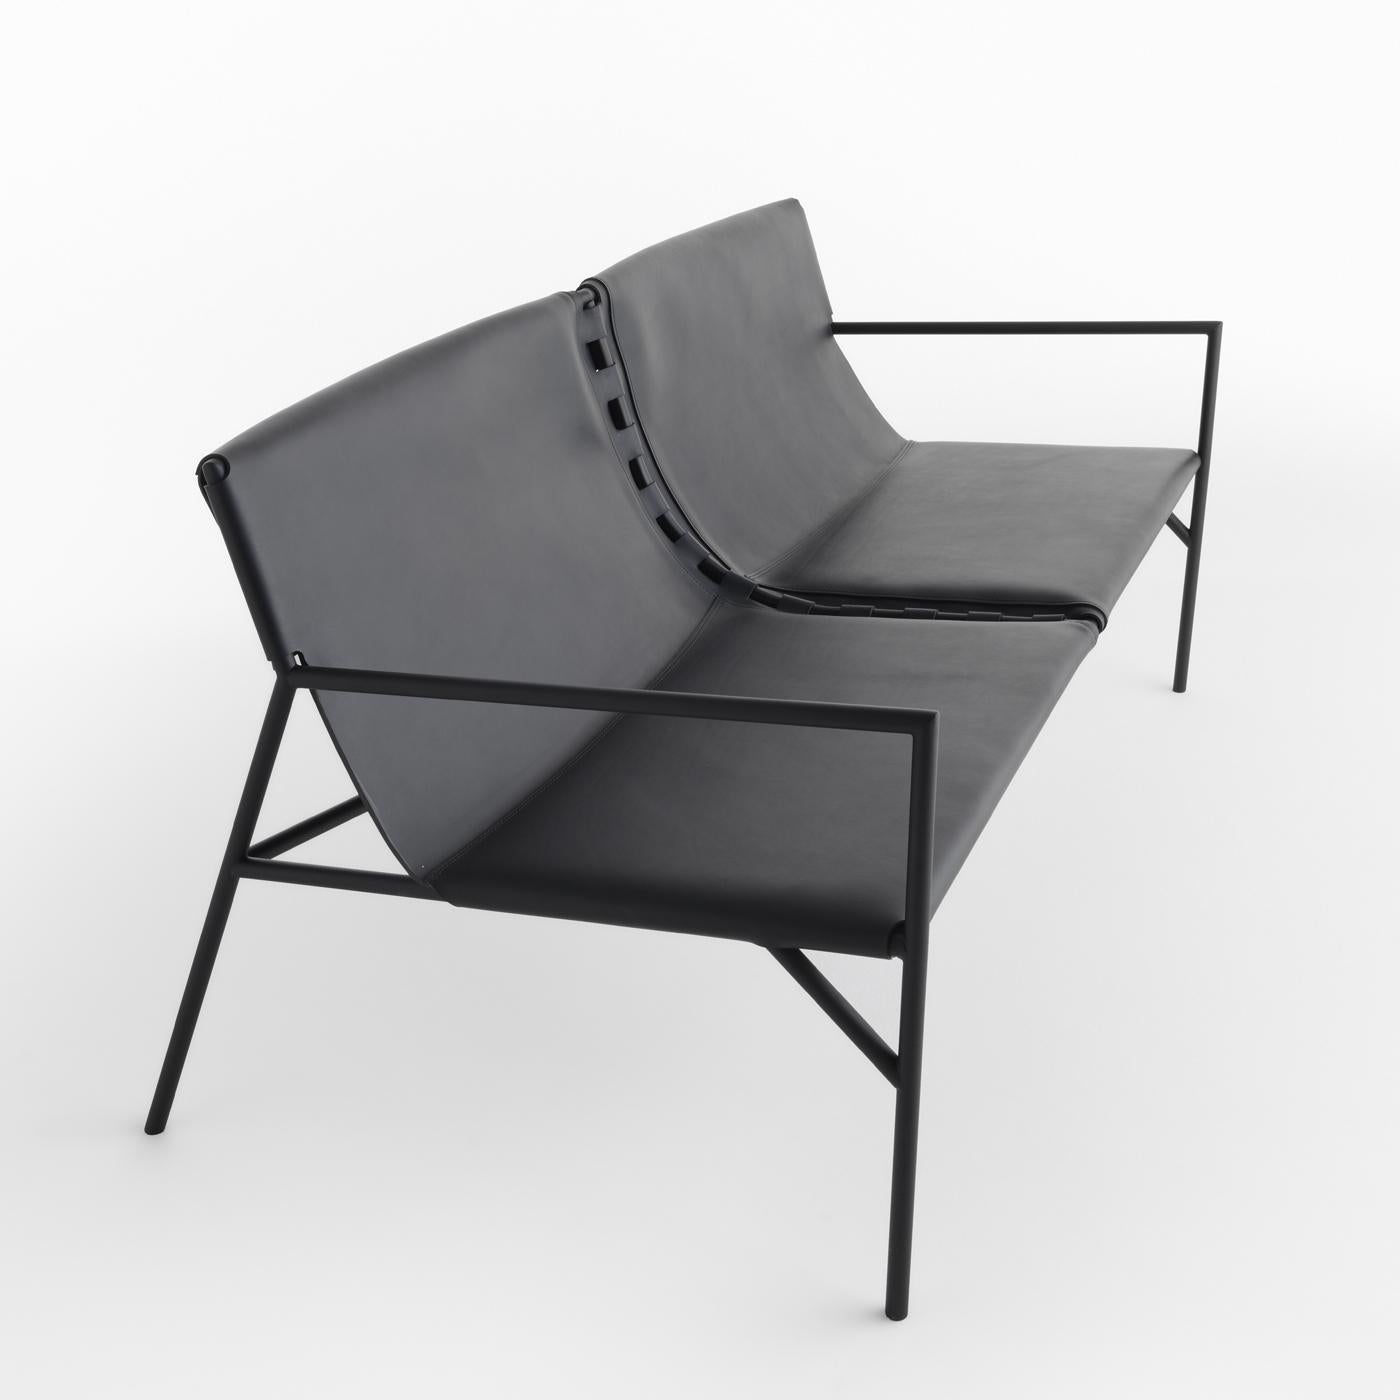 A slim and elegant sofa by Marc Thorpe, this piece combines a solid structure with refined materials for a sophisticated character. A simple and minimal design, it comprises a black metal structure with tubular legs and armrests, and a fine